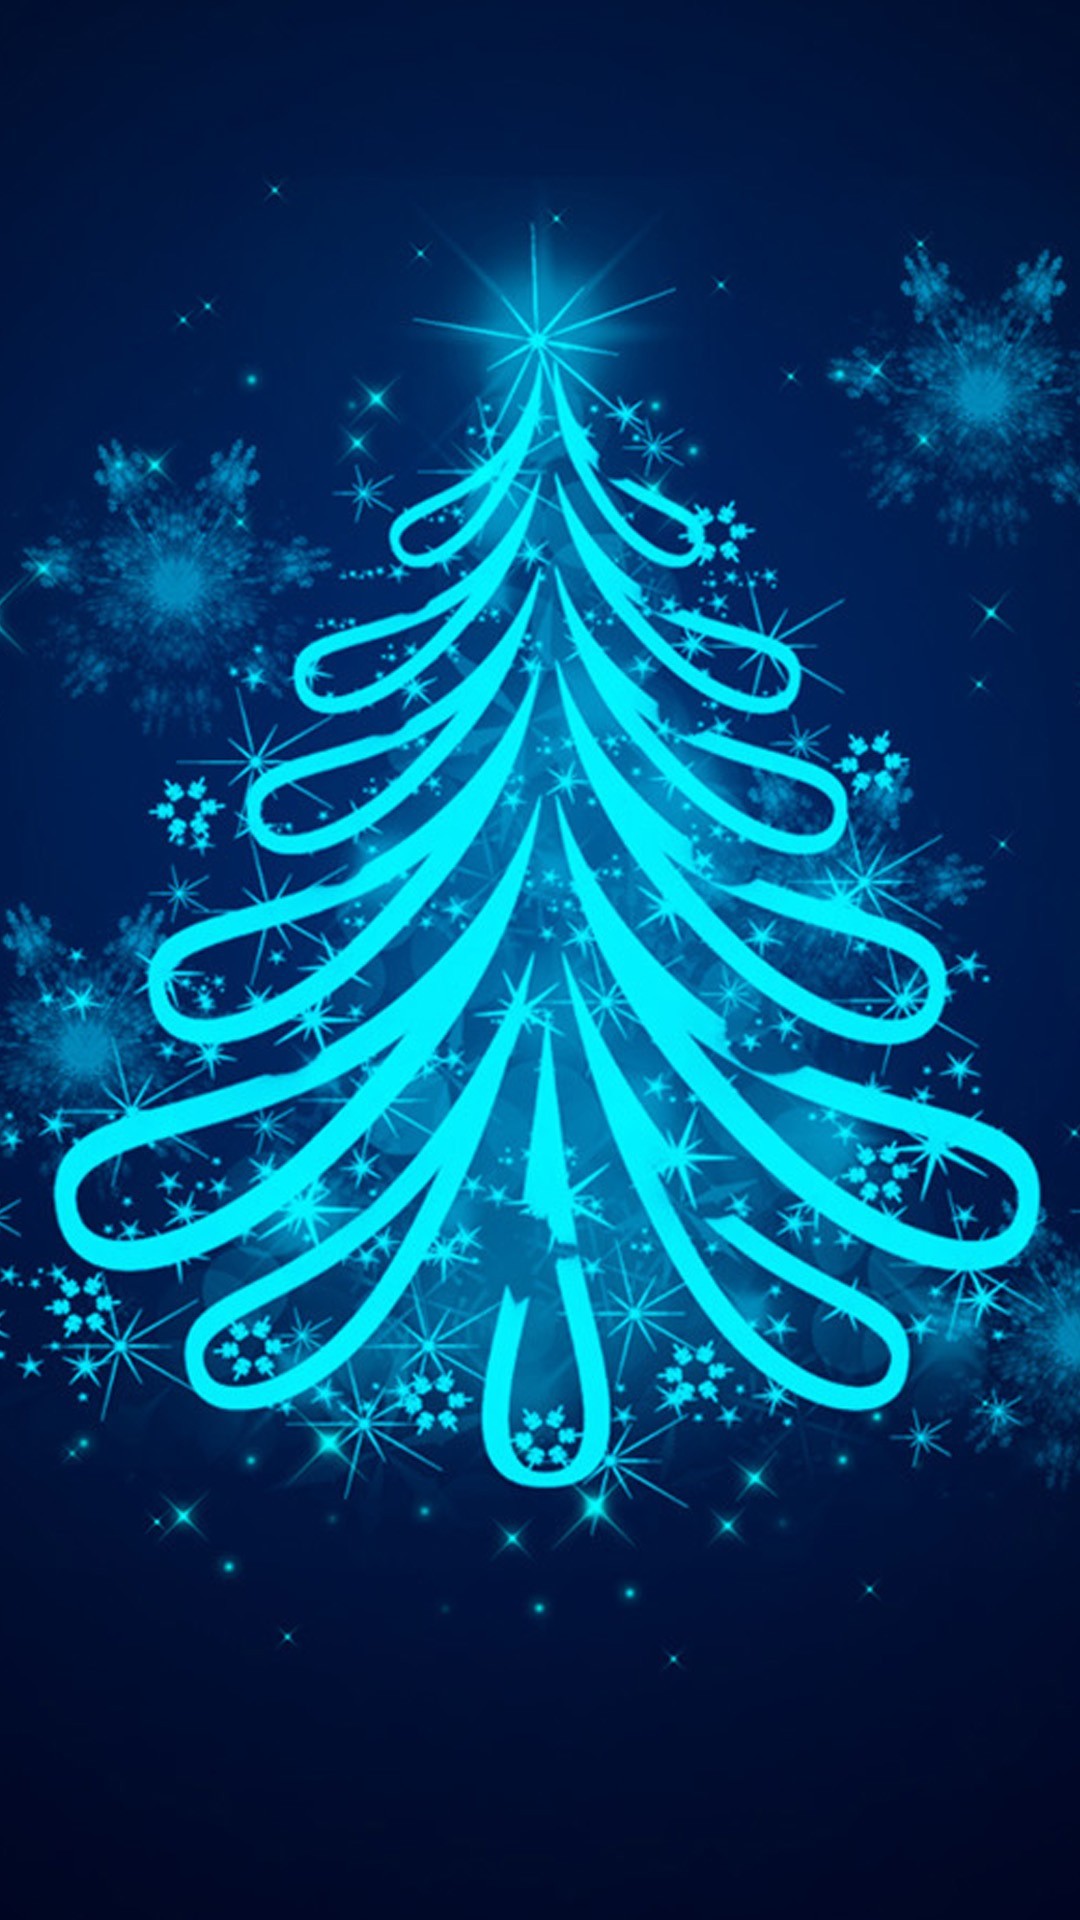 1080x1920 Where to buy 2015 Christmas tree and snowflakes iPhone 6 plus wallpaper  ideas for girls